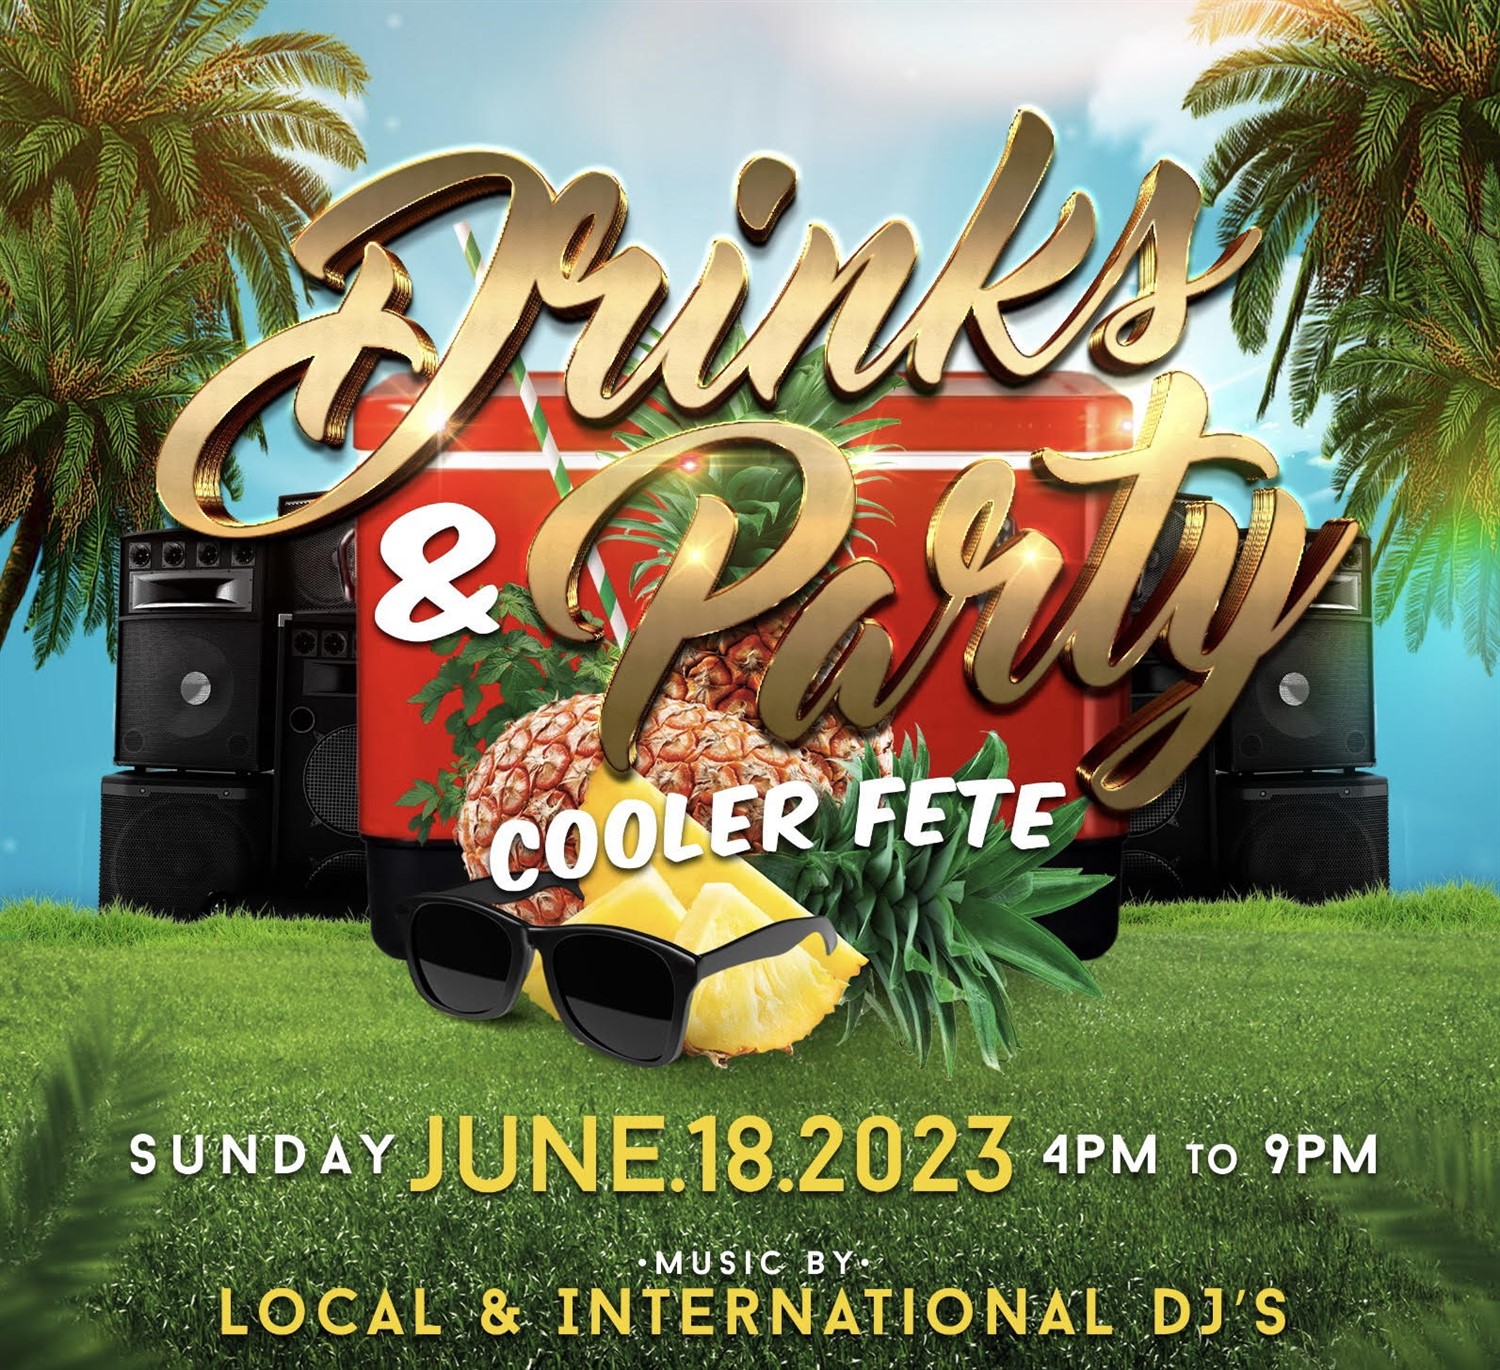 Drink & Party Cooler Fete  on Jun 18, 16:00@Anne Arundel  County Fairgrounds - Buy tickets and Get information on www.fetefinders.com tickets.fetefinders.com